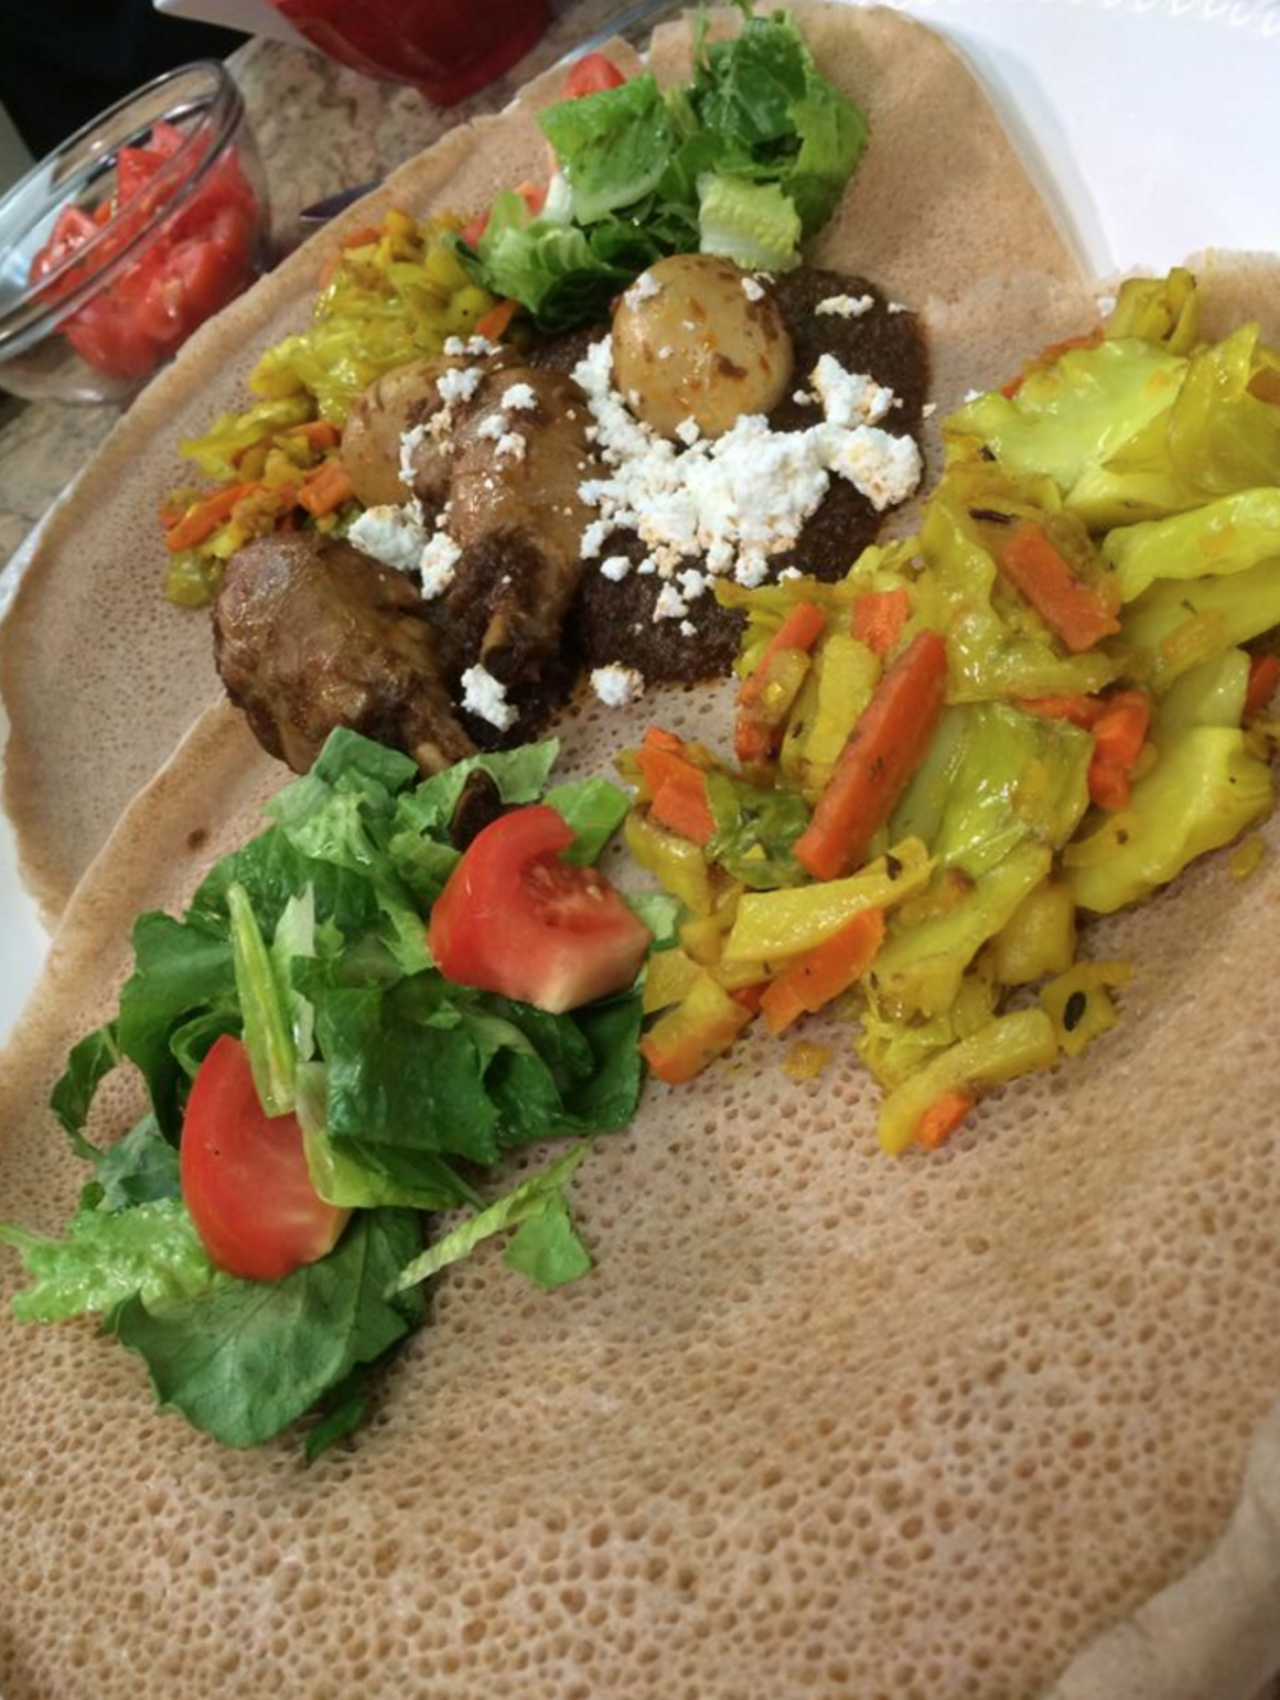  Berbere Ethiopian Cuisine
4741 Fredericksburg Road, (210) 310-9264, 11am-7pm Mon, Wed-Fri; 11am-5pm Tues
Named after a spice blend that contains chili peppers, garlic, ginger, basil, korarima, rue, ajwain or radhuni, nigella and fenugreek, Berbere Ethiopian recently launched a food truck now based at 4741 Fredericksburg Road. The menu packs in veggies and proteins so you'll find lentils, green beans, beets and stewed cabbage served alongside beef tibs, a dish of marinated beef. Dishes often include a spongy sourdough flatbread known as injera.Photo via Facebook,  Berbere Ethiopian Cuisine